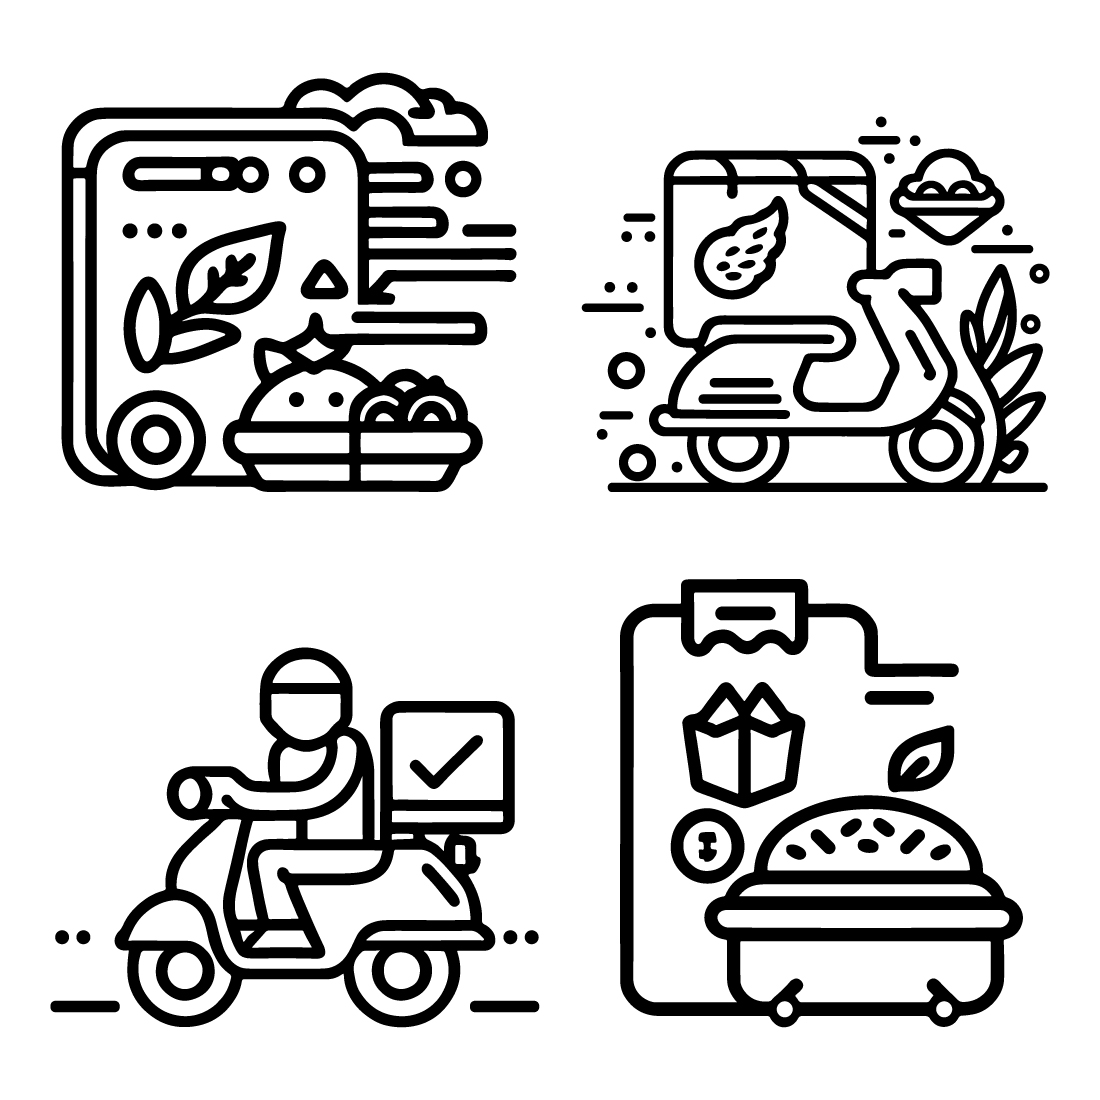 Delivery - Free transport icons